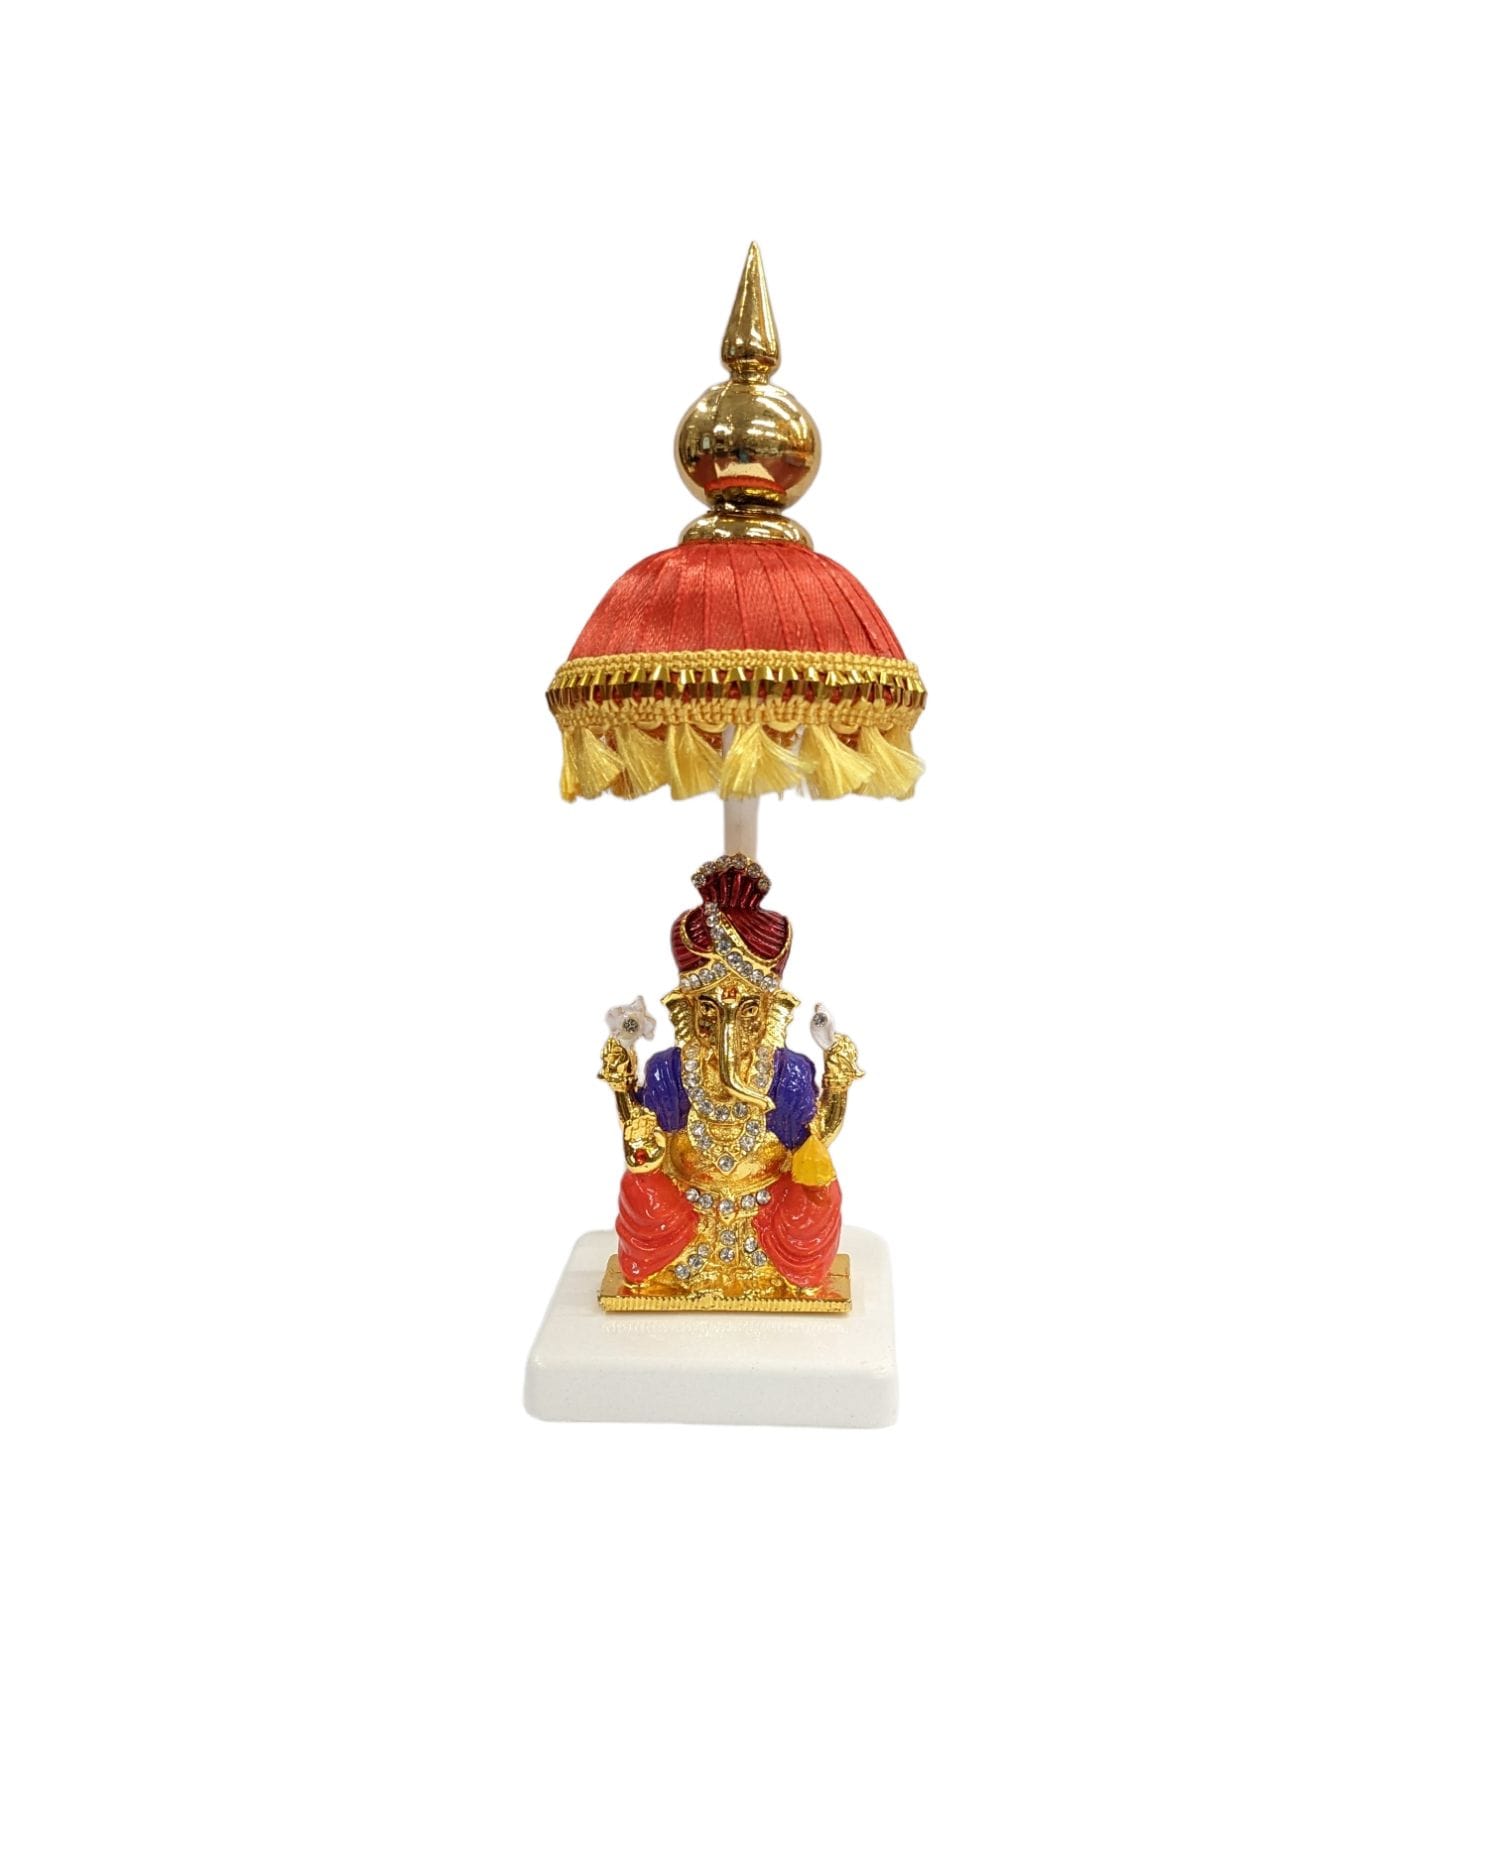 Image of a Car dashboard Idol of Ganesha with a red colored Chattar on top